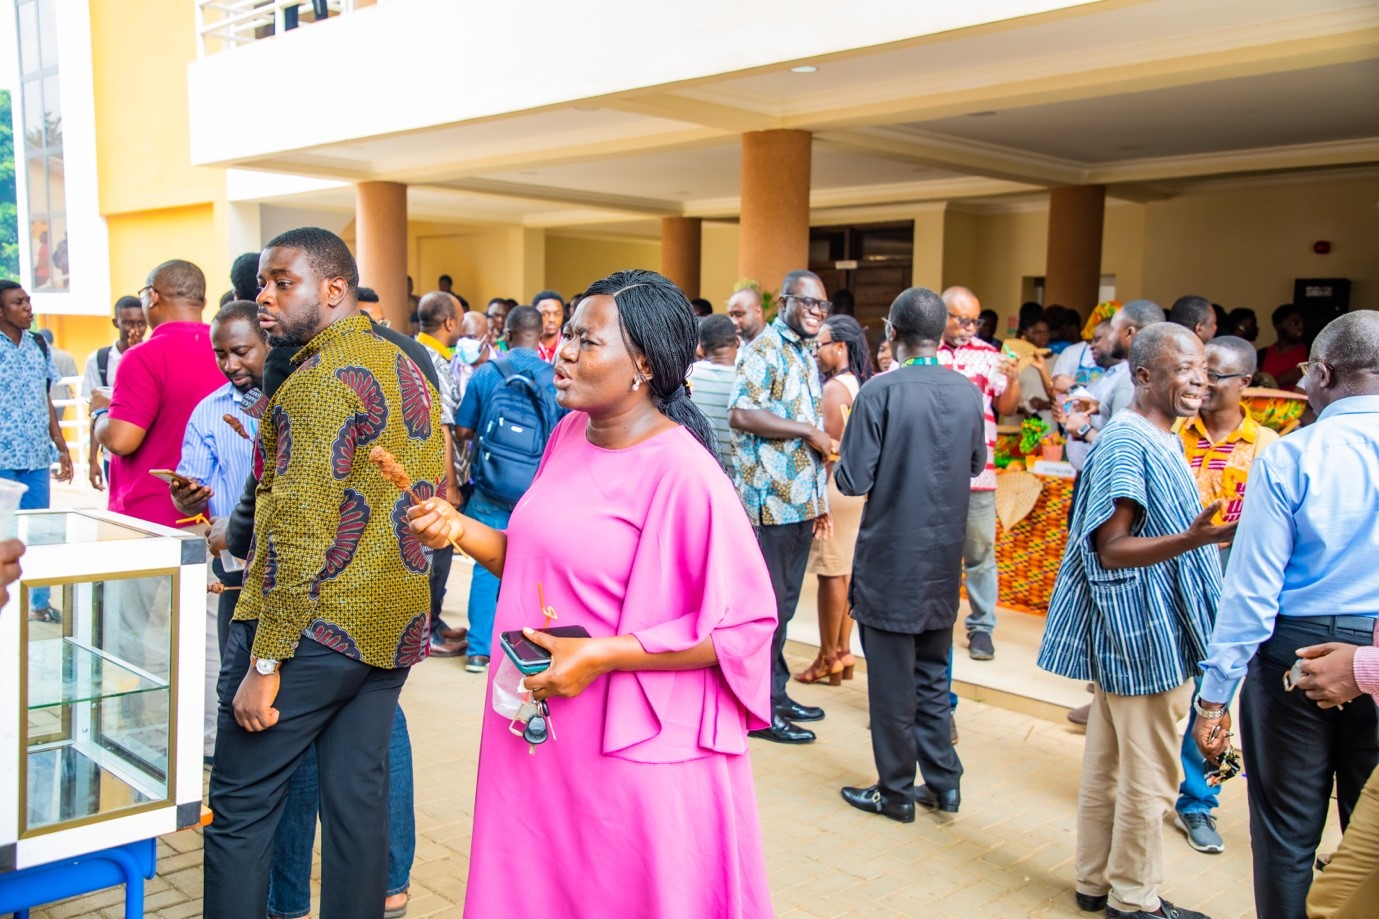 KNUST College of Engineering Hosts Senior Members' Barbecue to Promote Endowment Fund Initiative